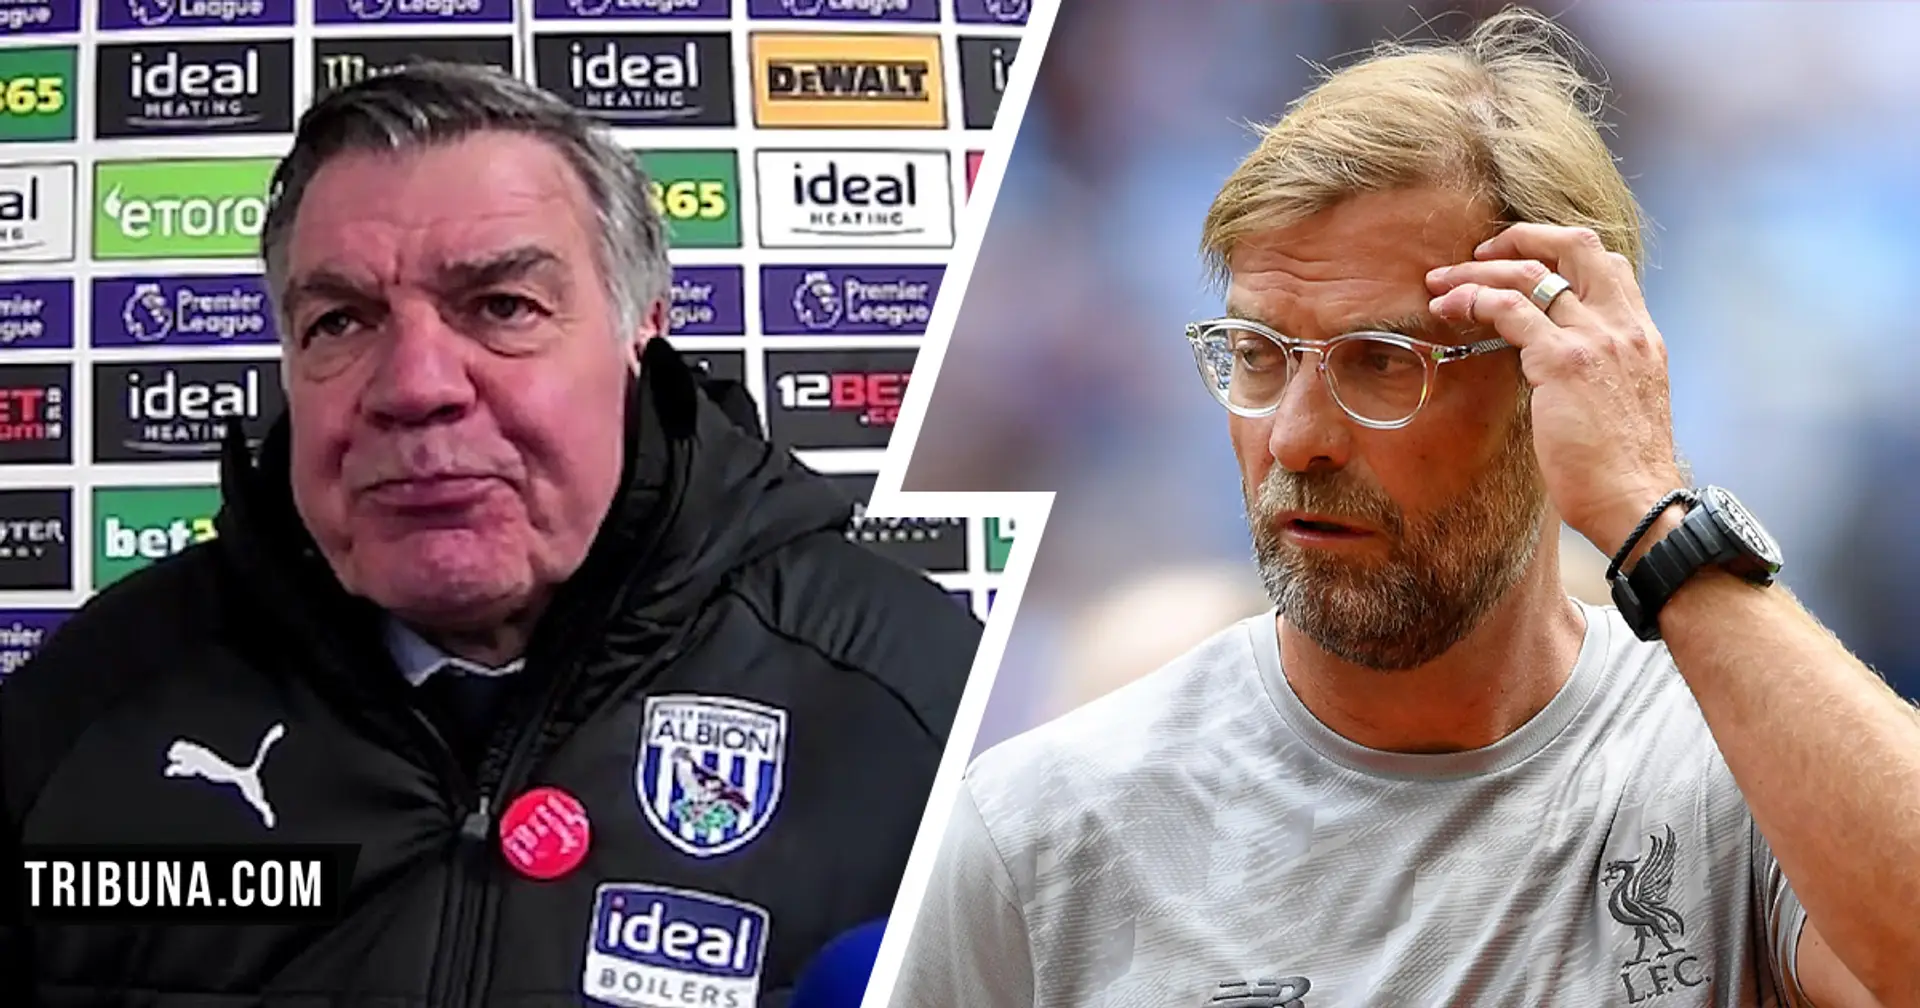 Sam Allardyce reveals how West Brom intend to 'hurt' Liverpool ahead of crucial Premier League match